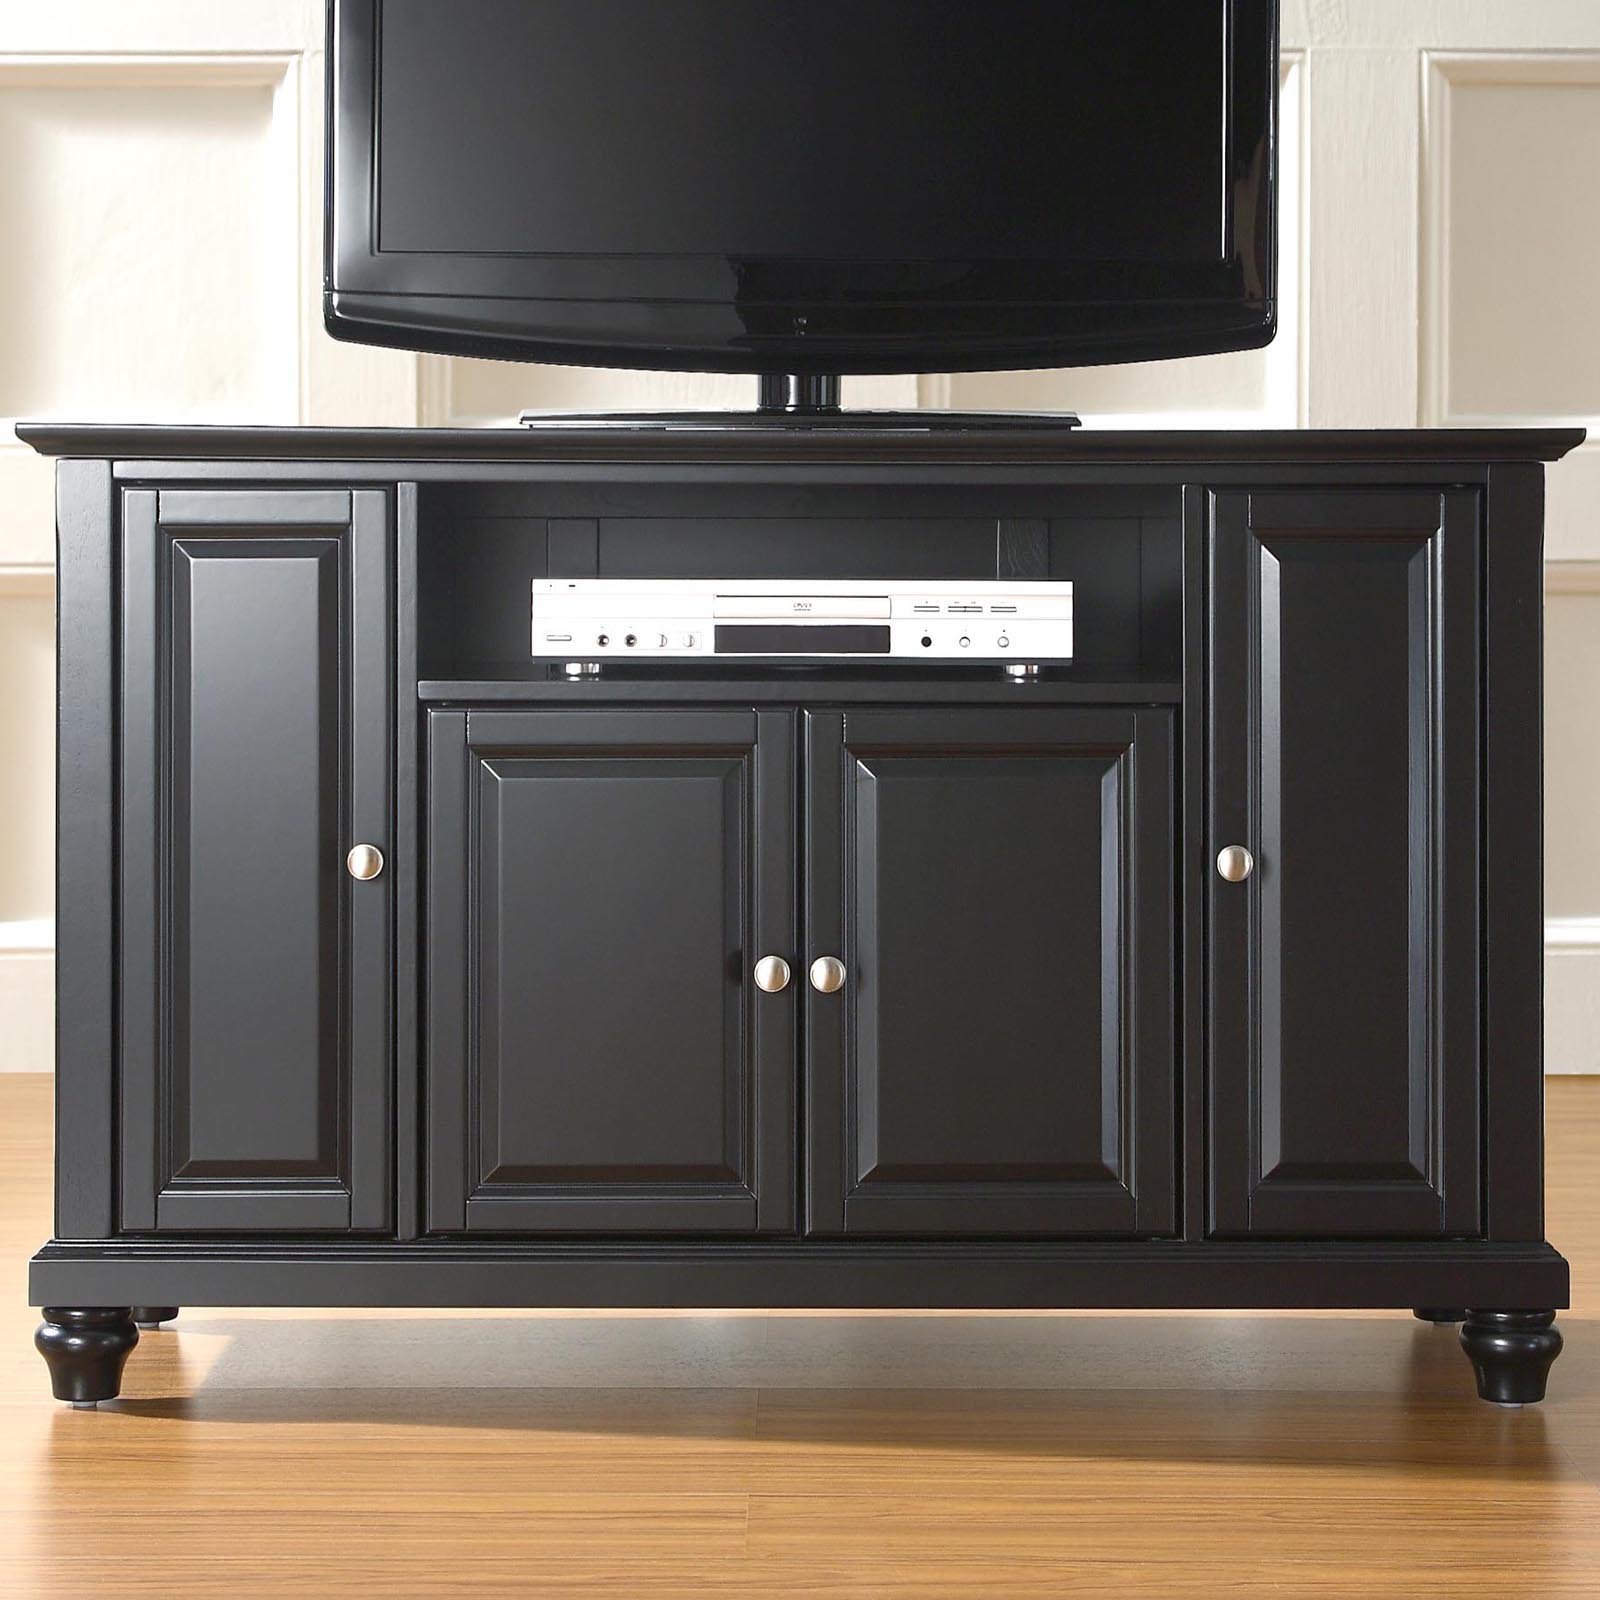 CAMBRIDGE 48" TV STAND IN BLACK FINISH - image 2 of 11